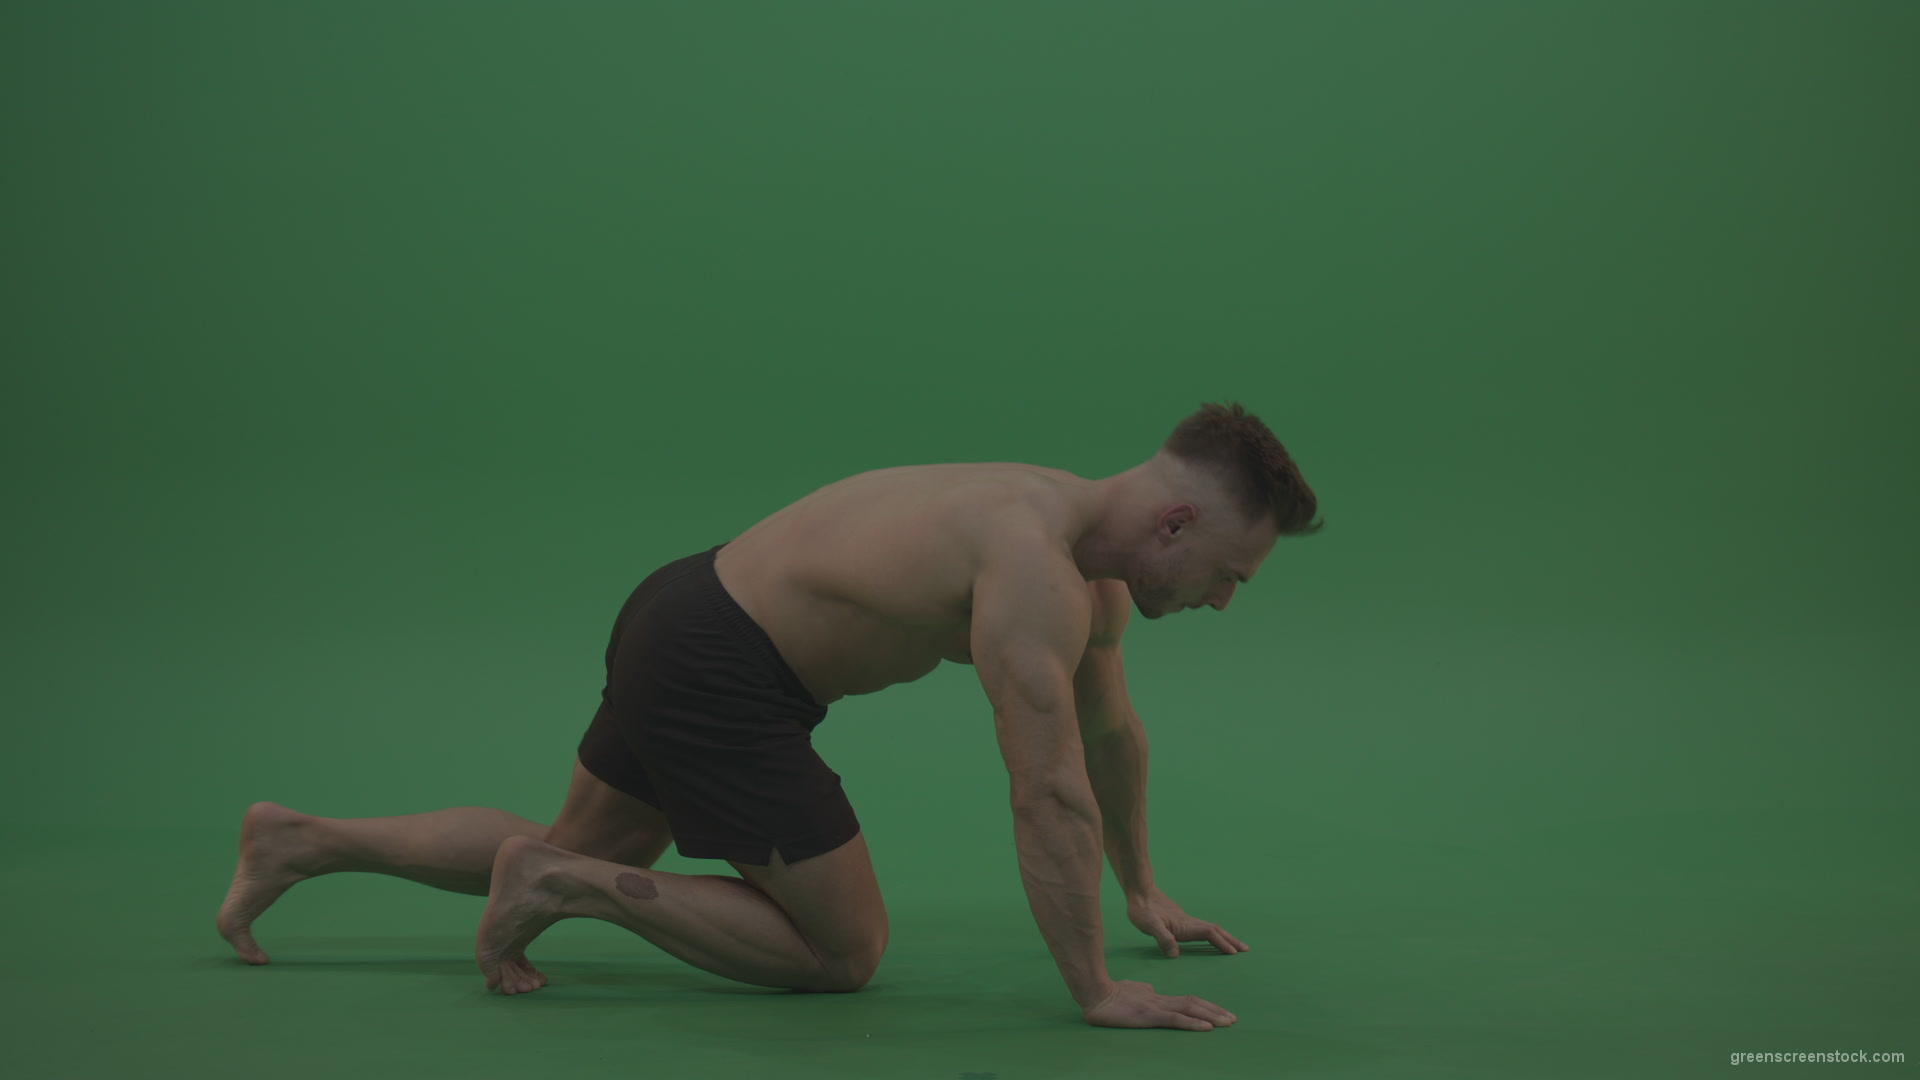 Young_Bodybuilder_Starts_Working_Out_From_Crouching_Terminator_Position_Does_Pull_Ups_Turns_Back_To_The_Start_Position_On_Green_Screen_Wall_Background_008 Green Screen Stock